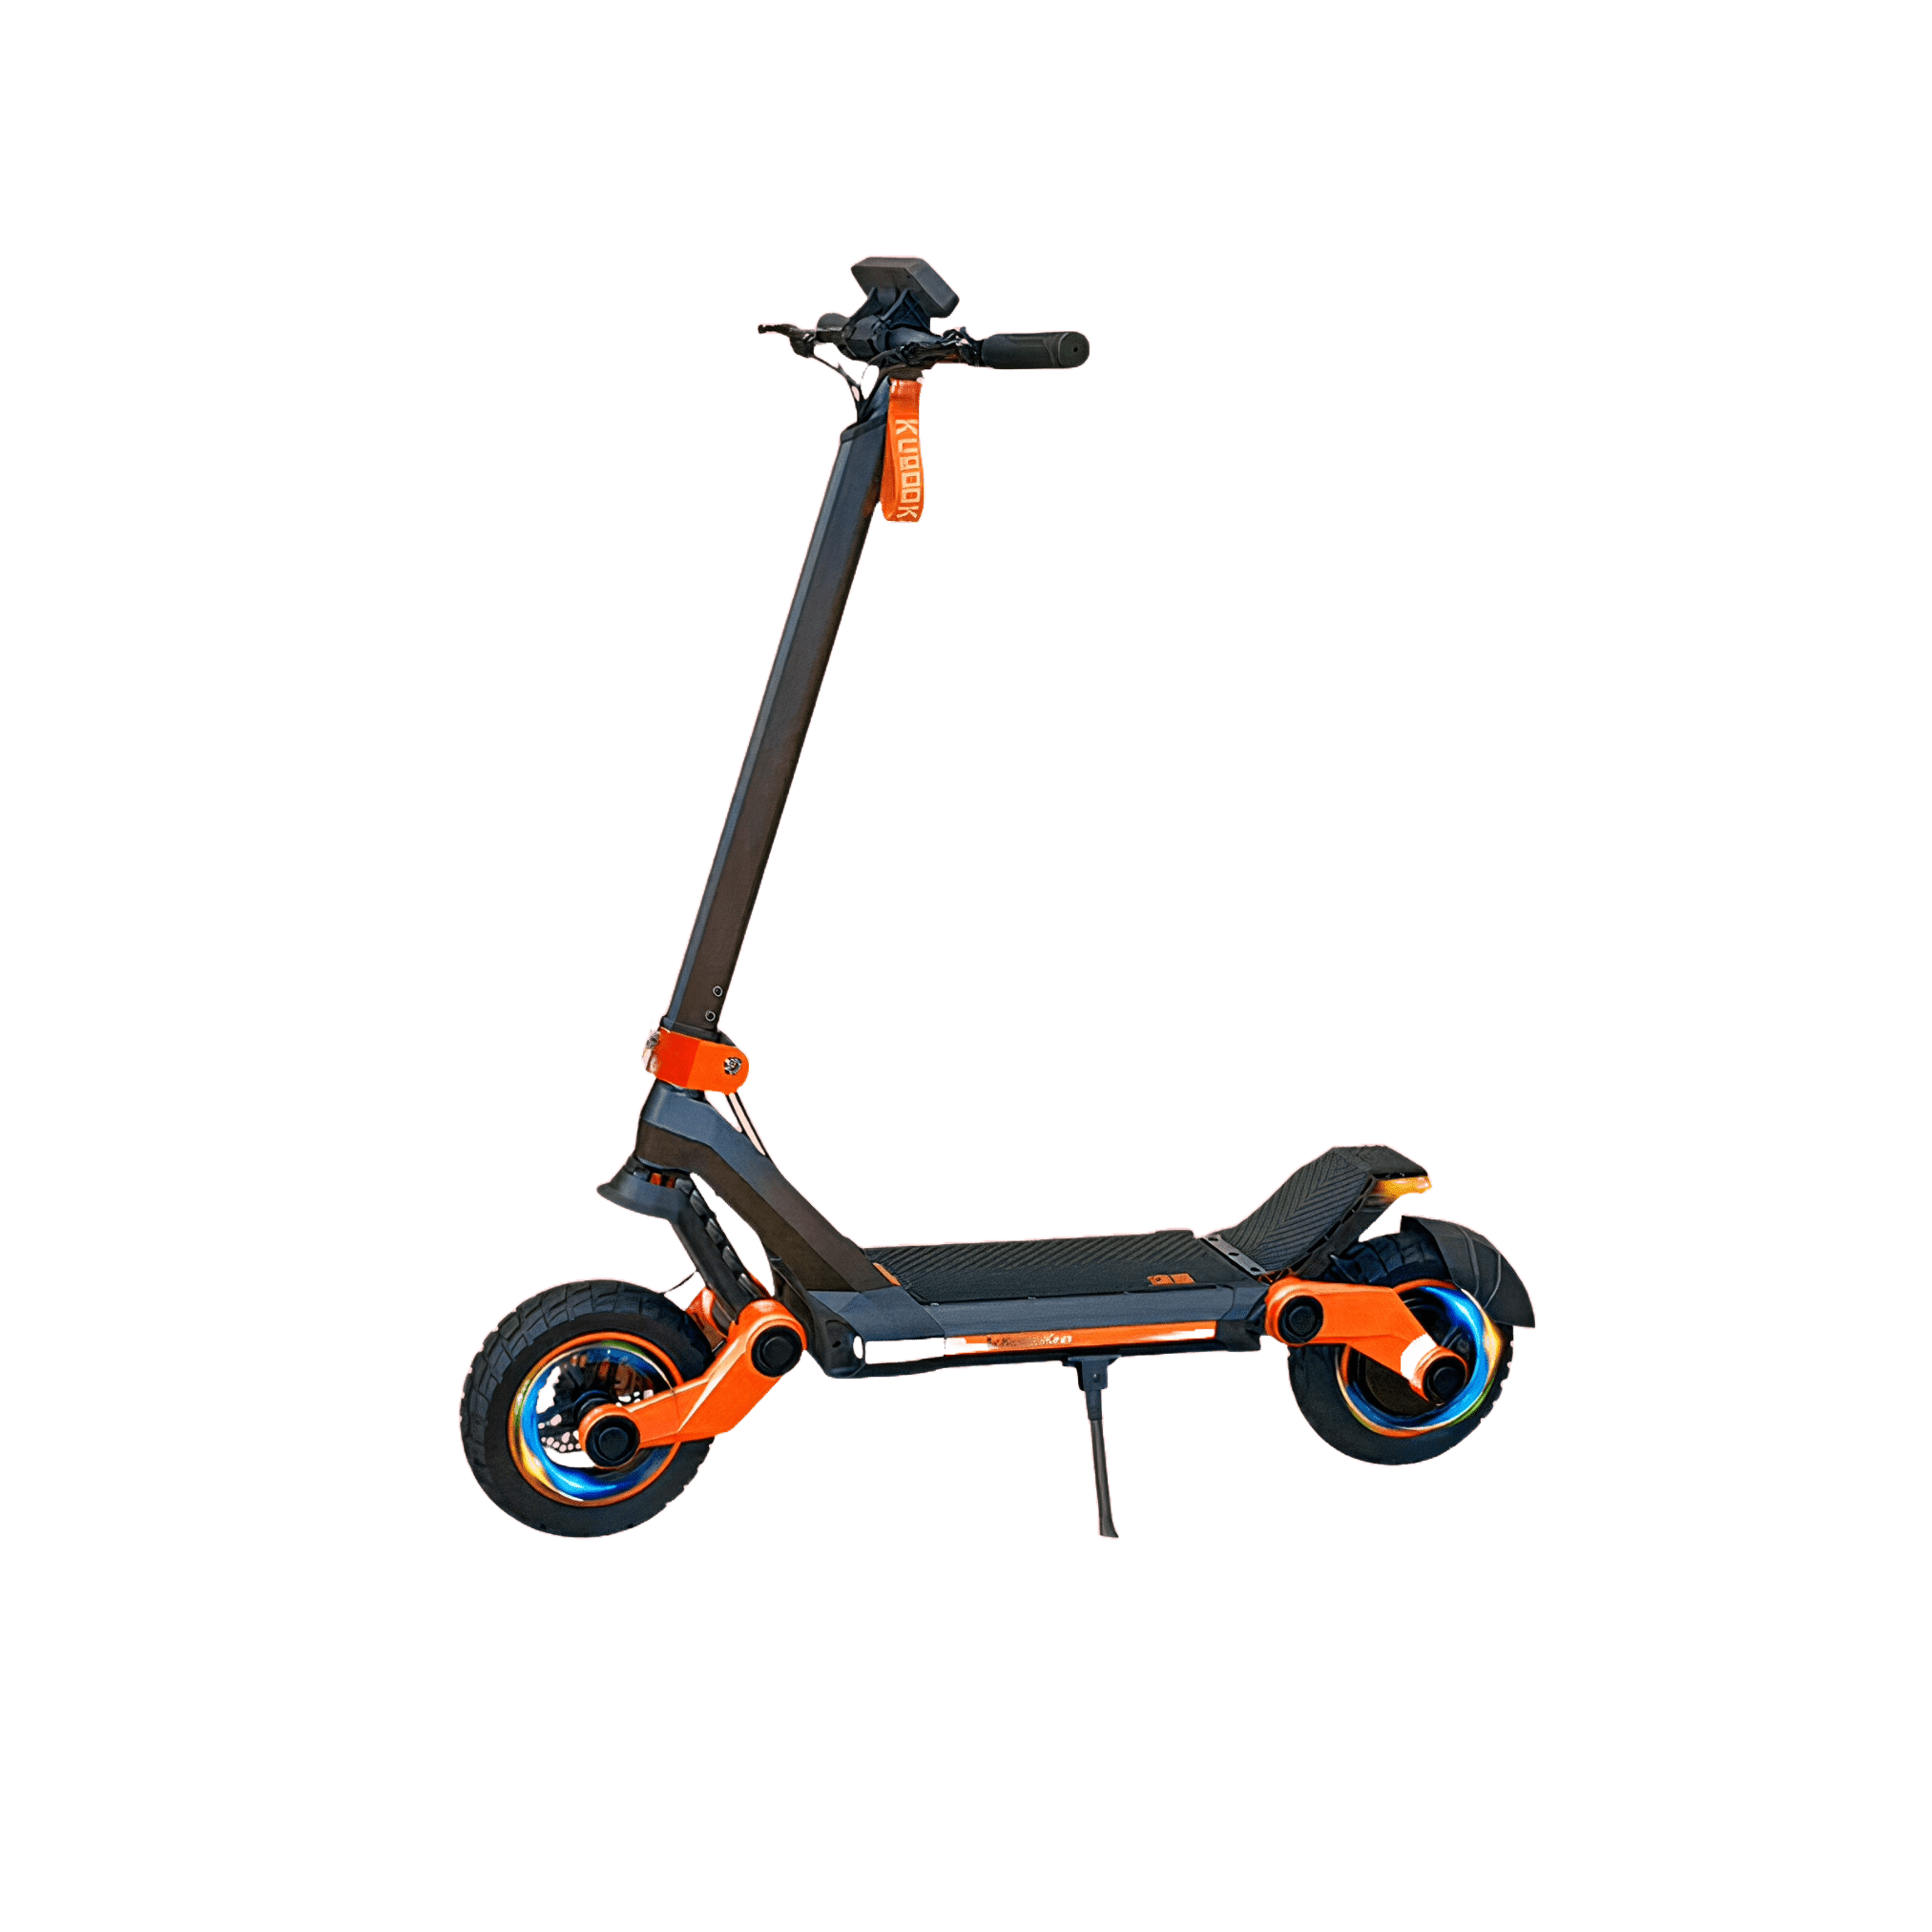 TEAMGEE G3 FOLDABLE ELECTRIC SCOOTER - ScootiBoo